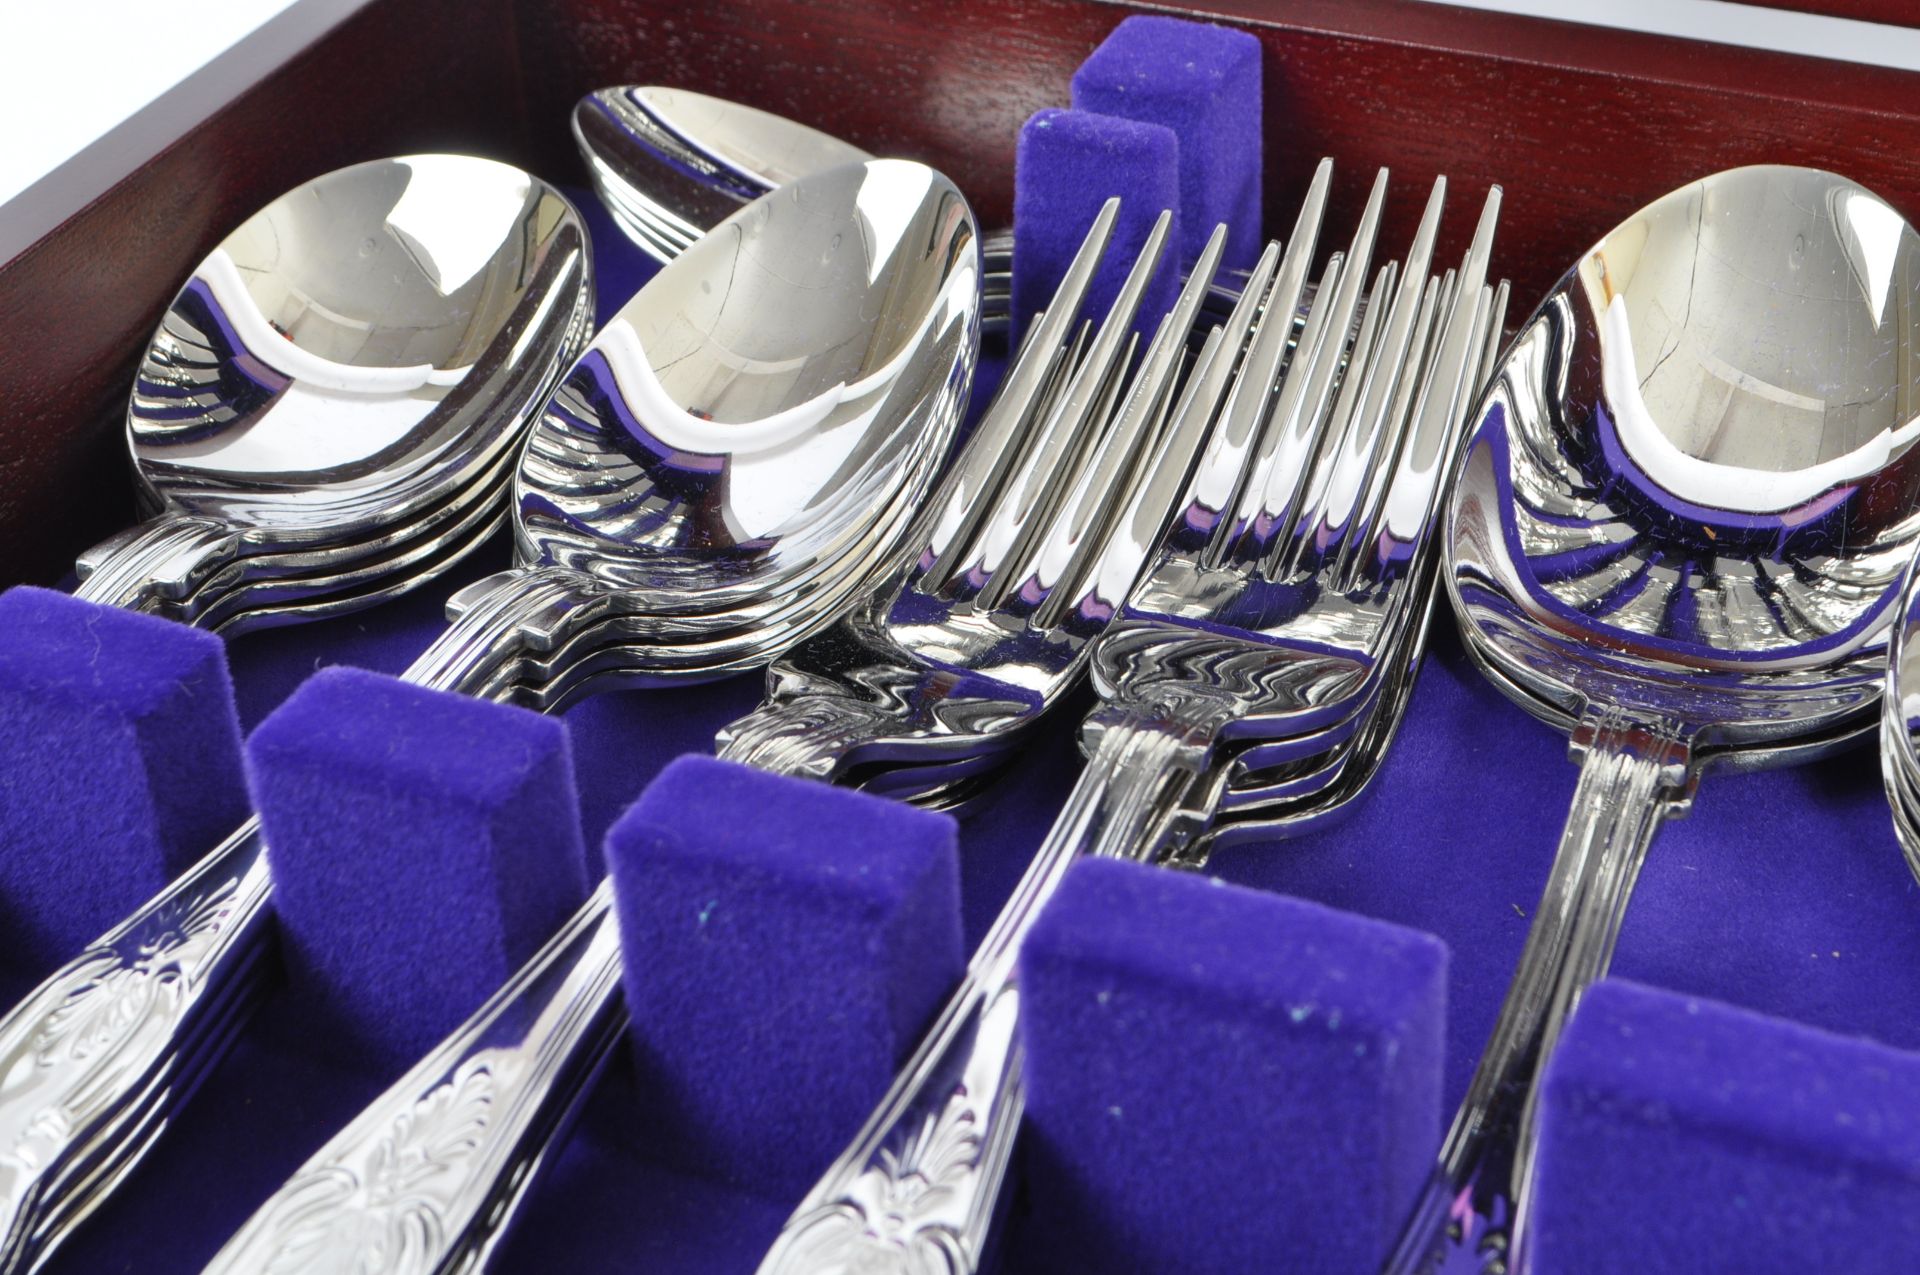 1970S STAINLESS STEEL CUTLERY SET BY ARTHUR PRICE INTERNATIONAL - Image 5 of 11